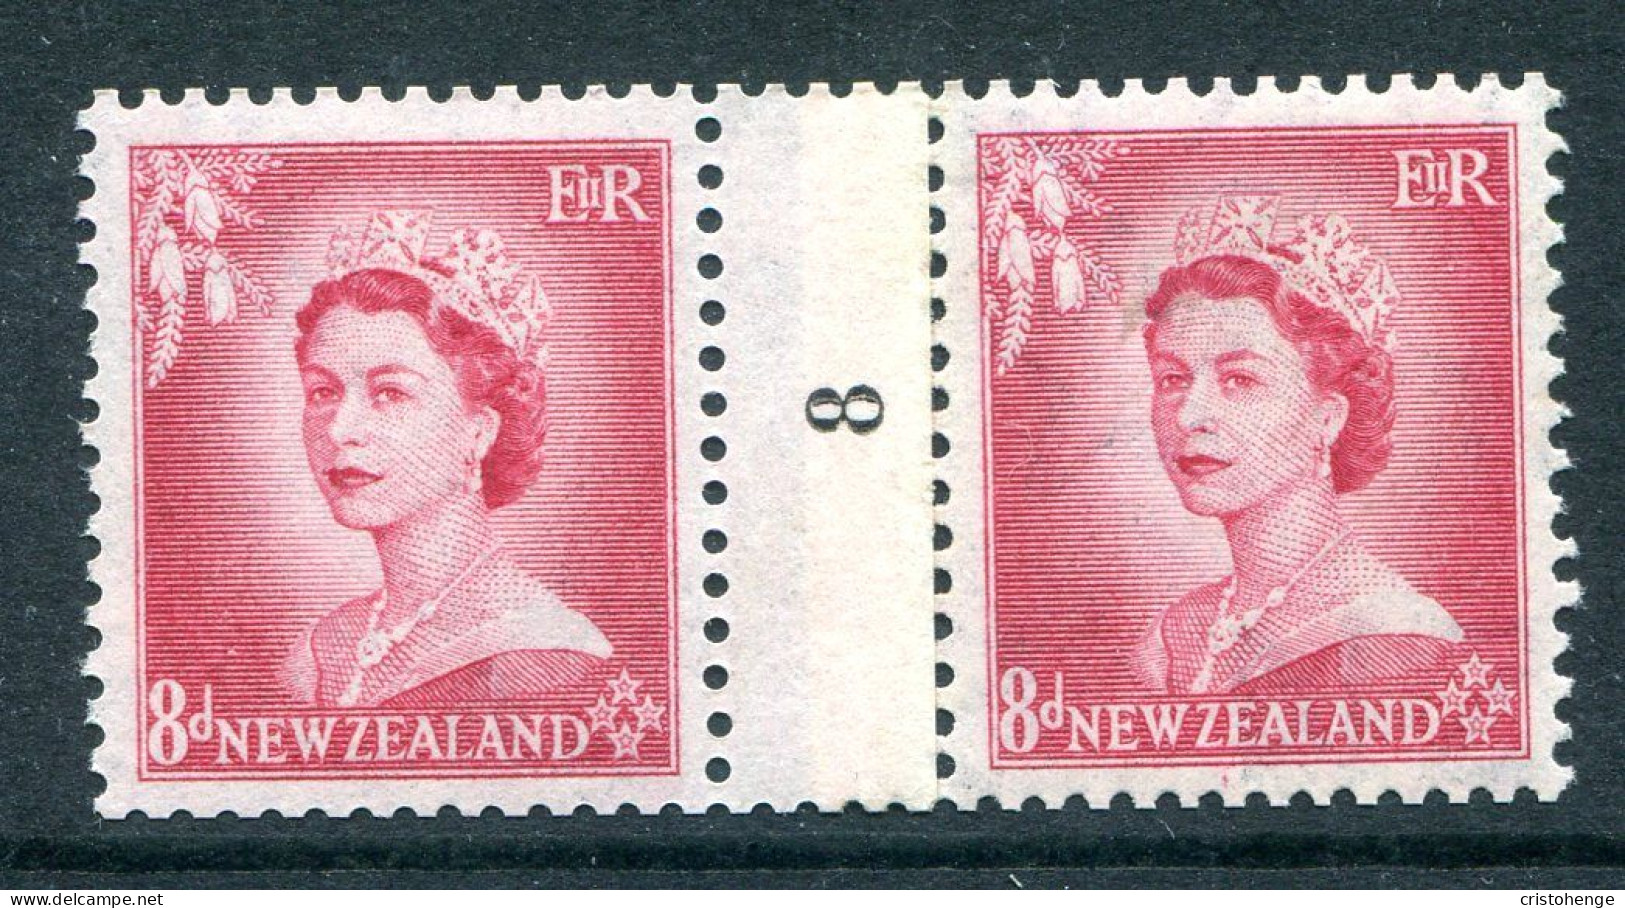 New Zealand 1953-59 QEII Definitives - Coil Pairs - 8d Rose-carmine - No. 8 - LHM (SG Unlisted) - Unused Stamps